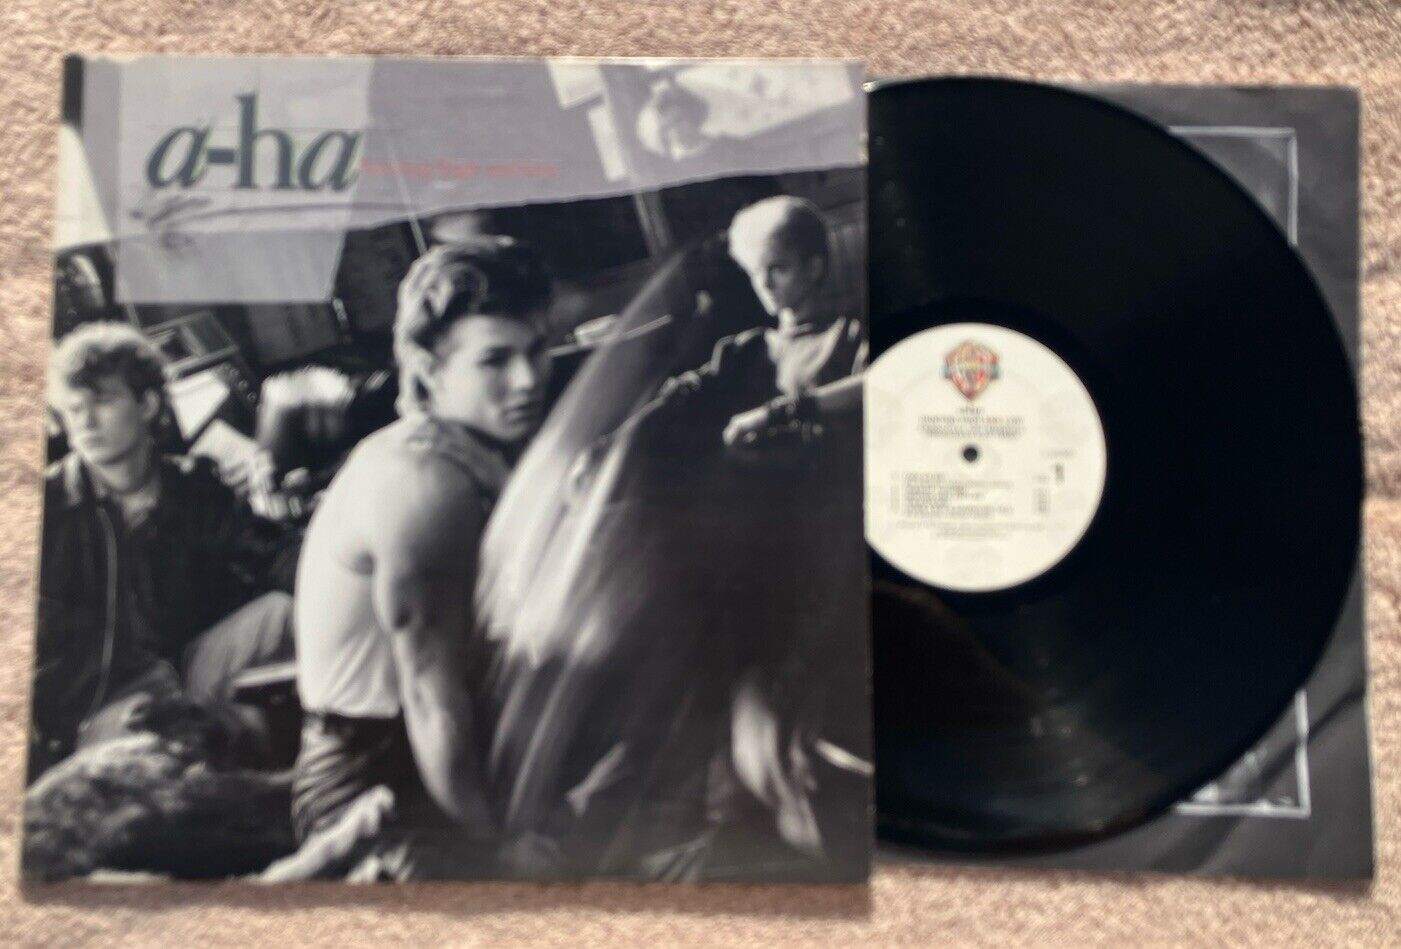 a-ha HUNTING HIGH and LOW WB Records 25300 1985